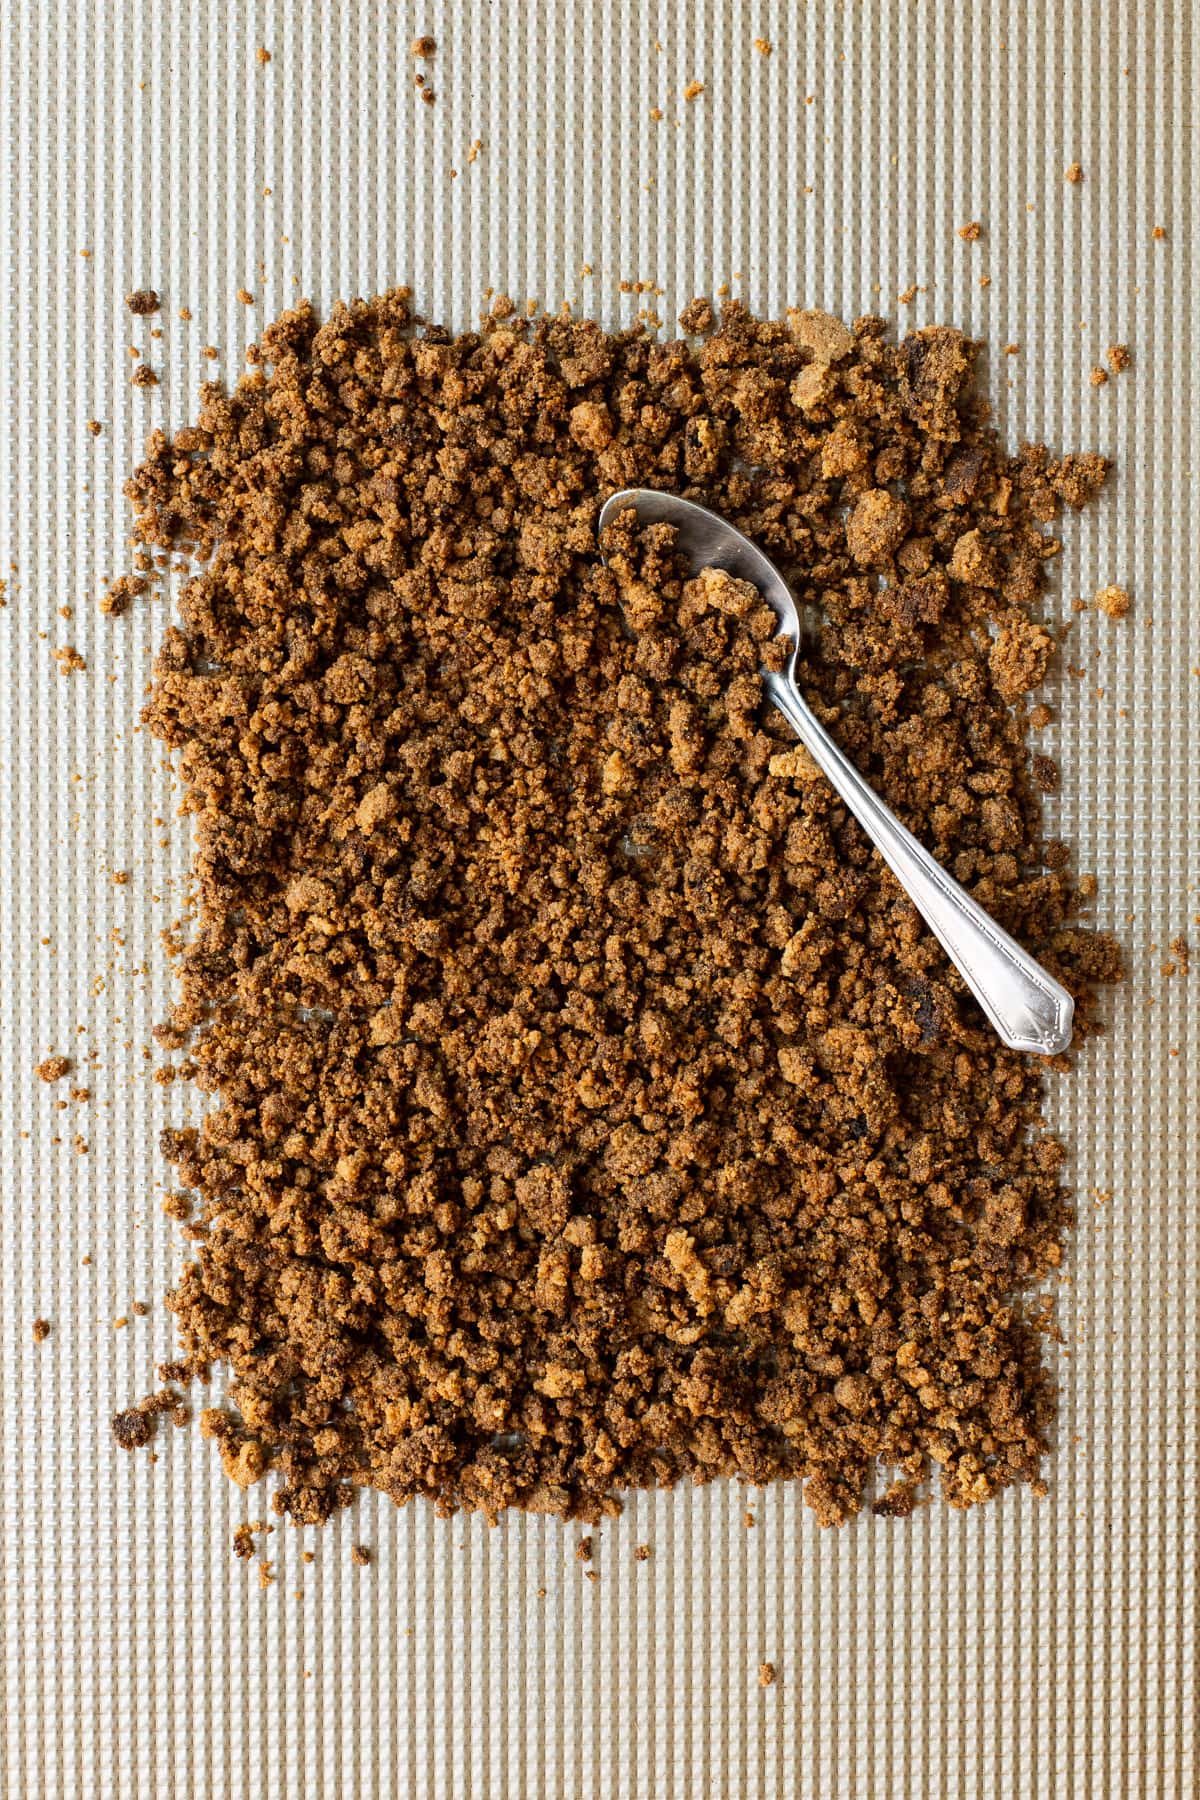 Graham cracker crumbs on a metal pan with a spoon.